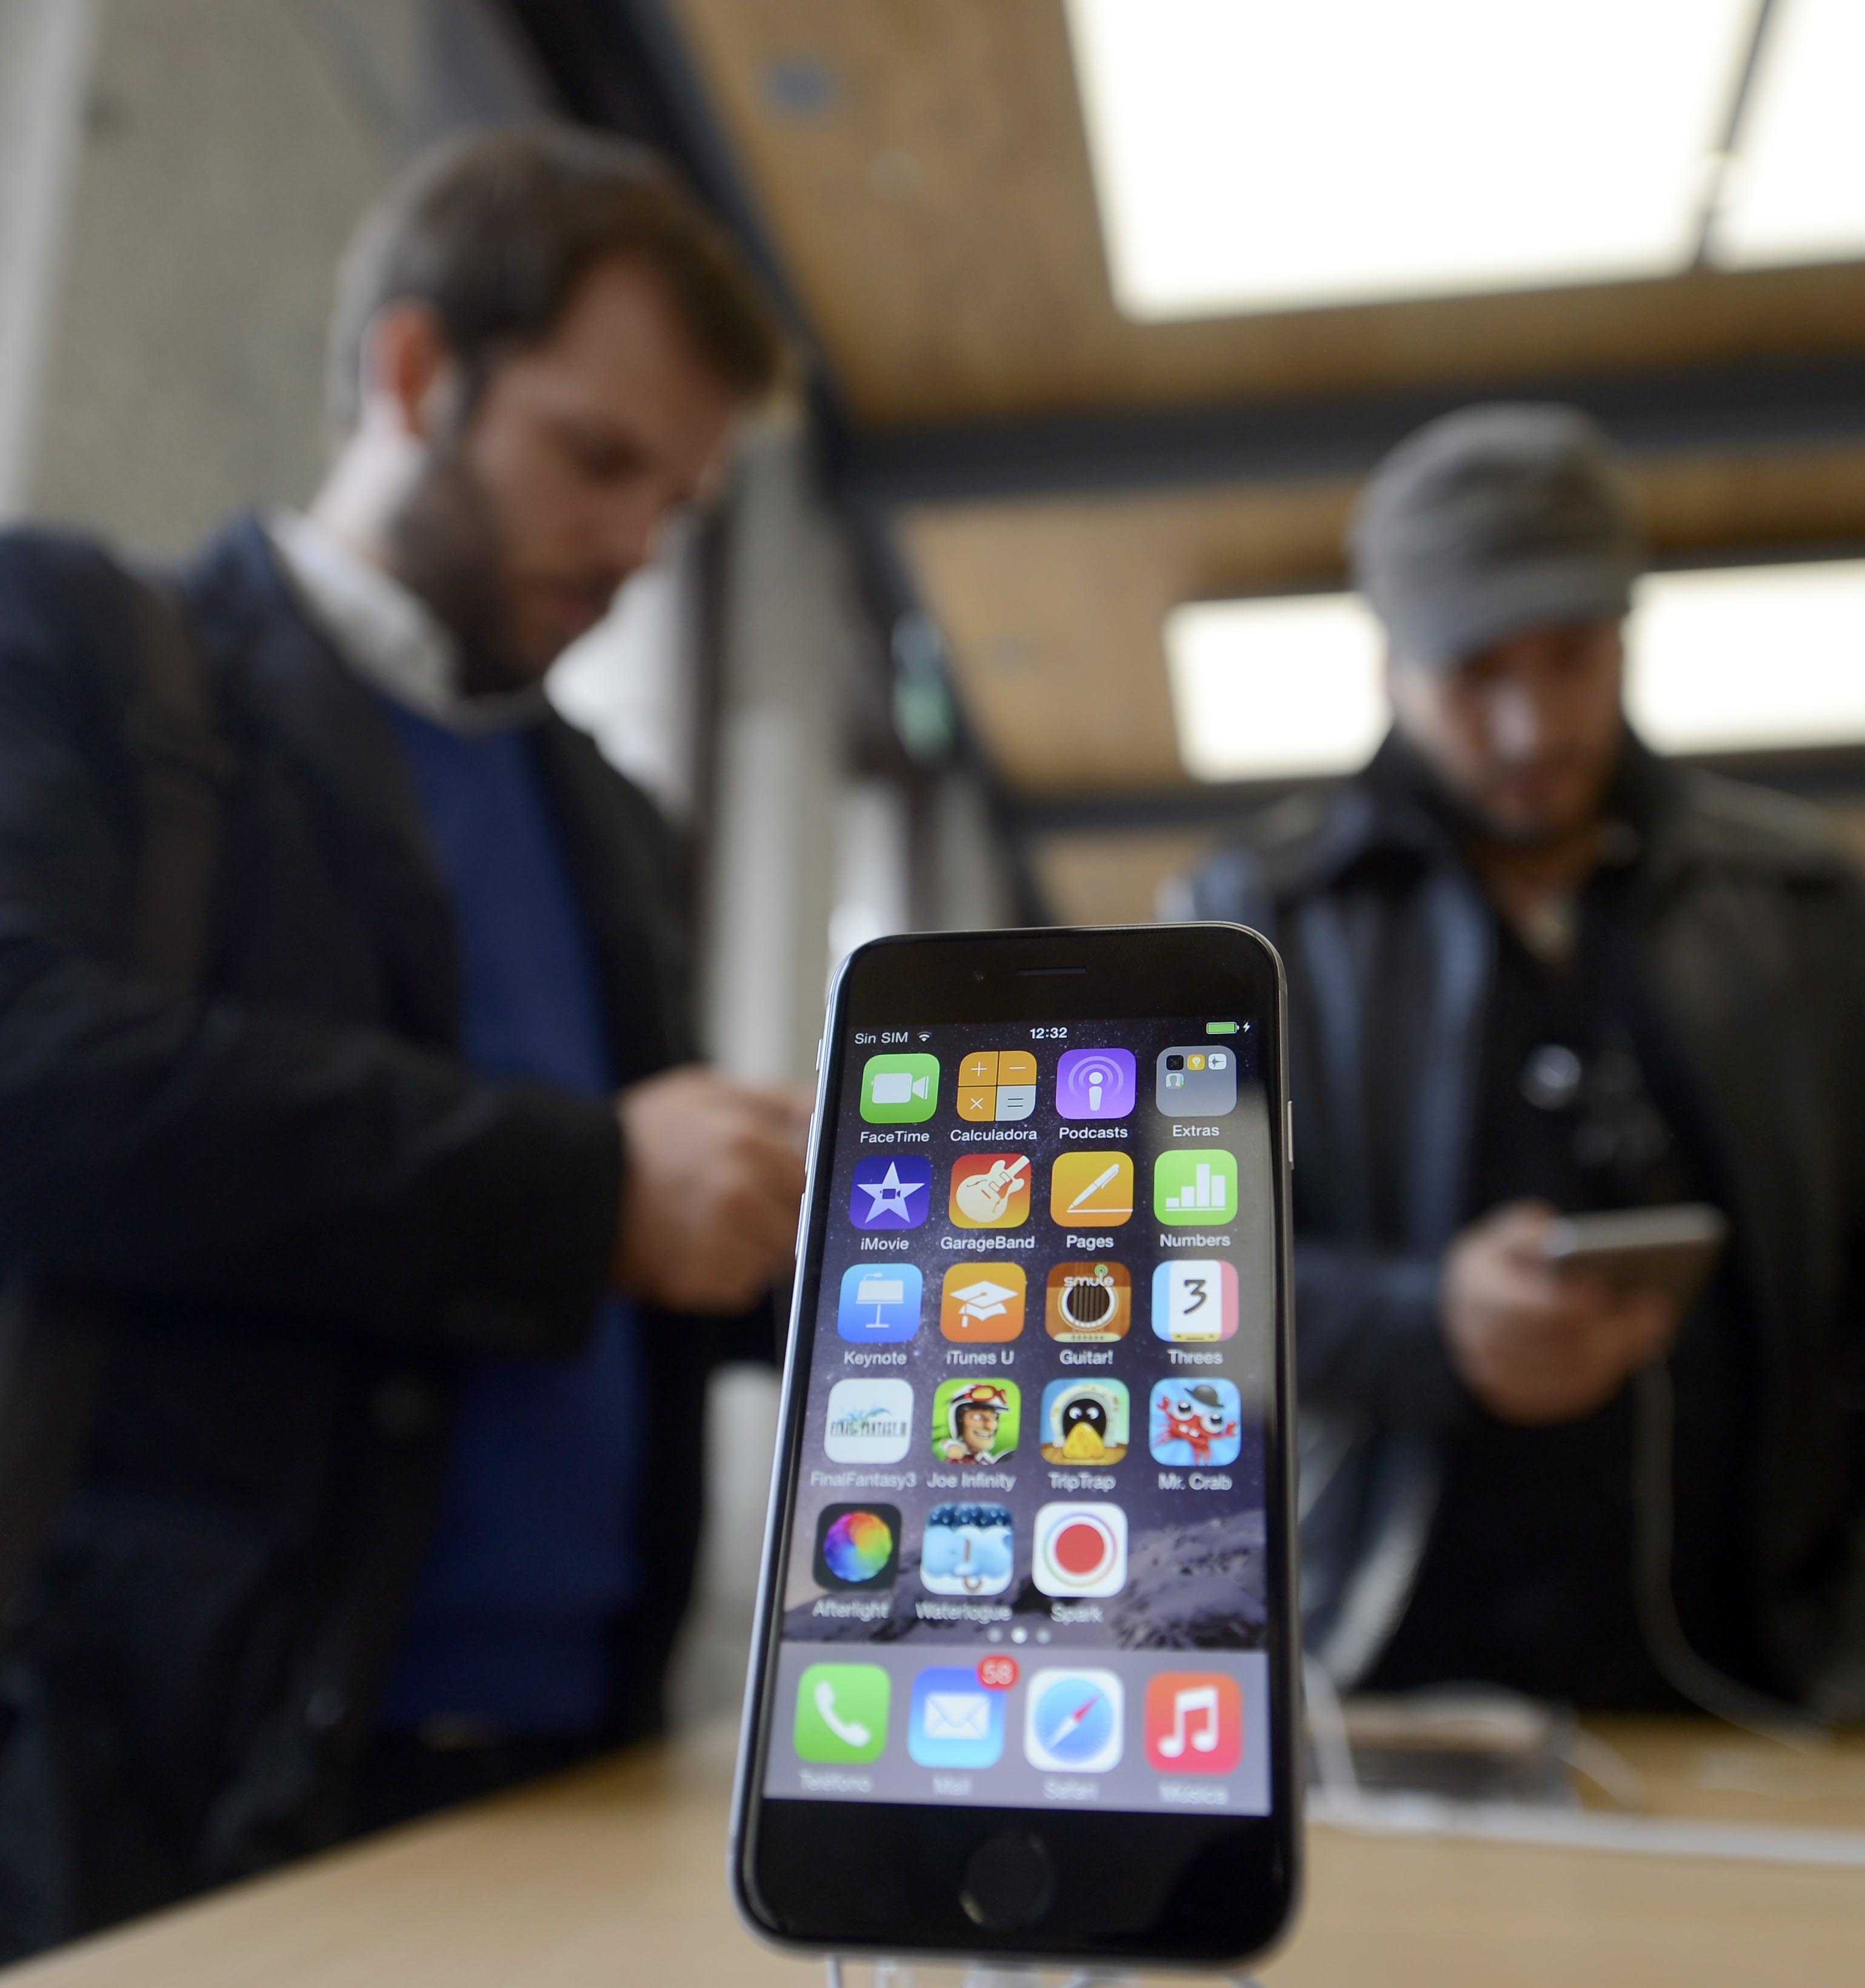 The new product of Apple, iPhone 6 Plus, is on display at an Apple Store in Madrid, Spain, on September 26, 2014. (Anadolu Agency&mdash;Getty Images)